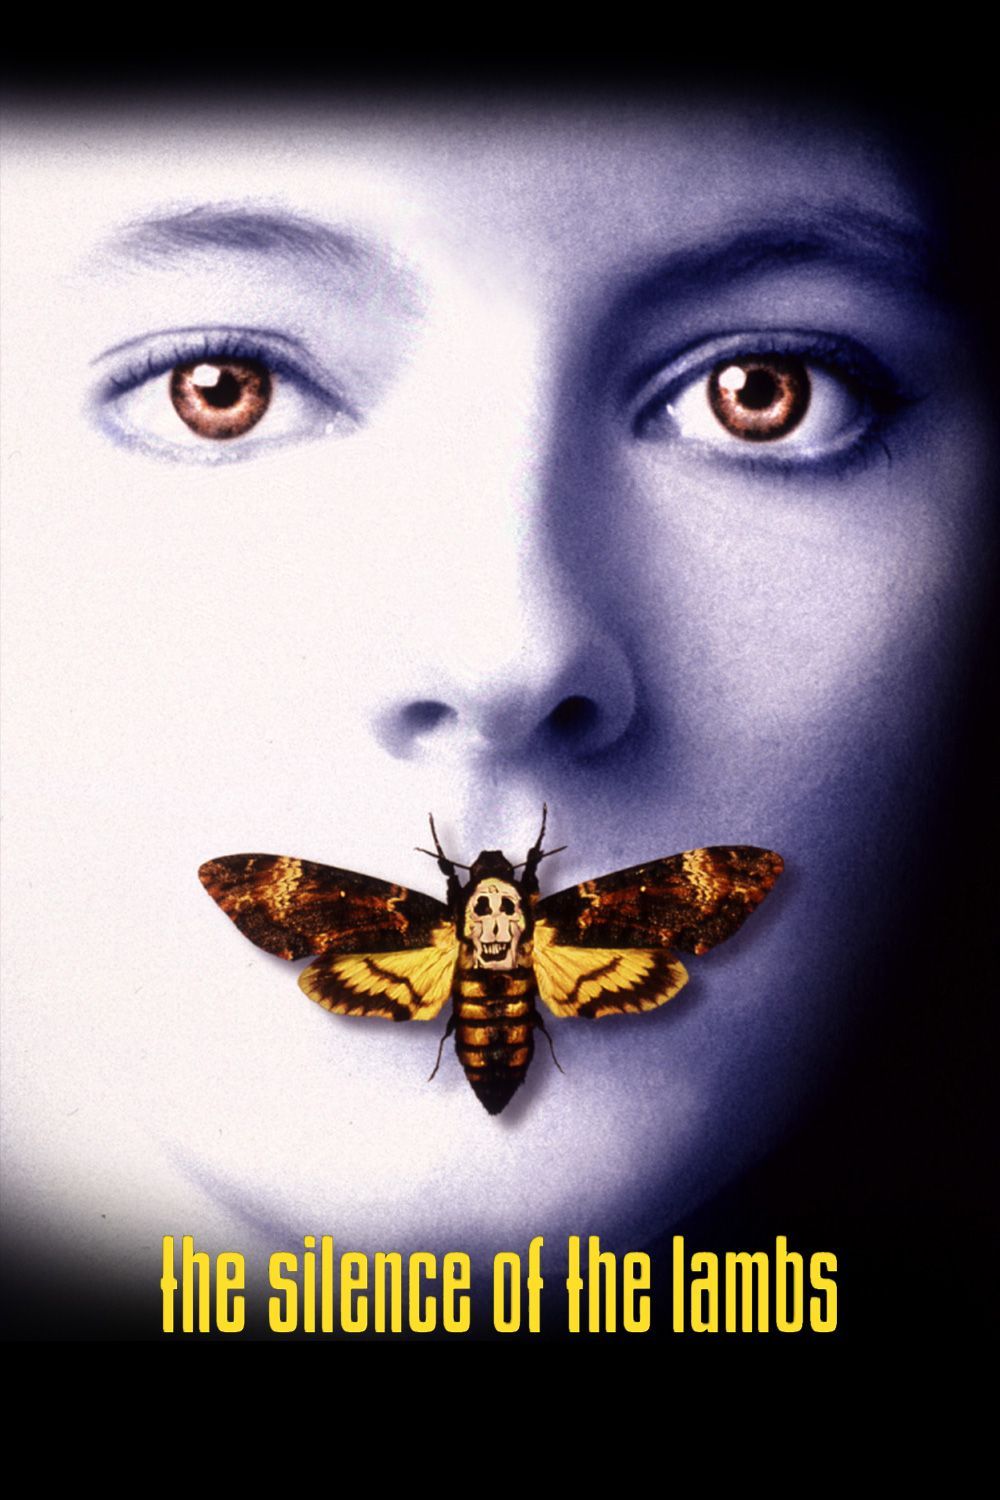 1330x748px The Silence Of The Lambs 509.68 KB